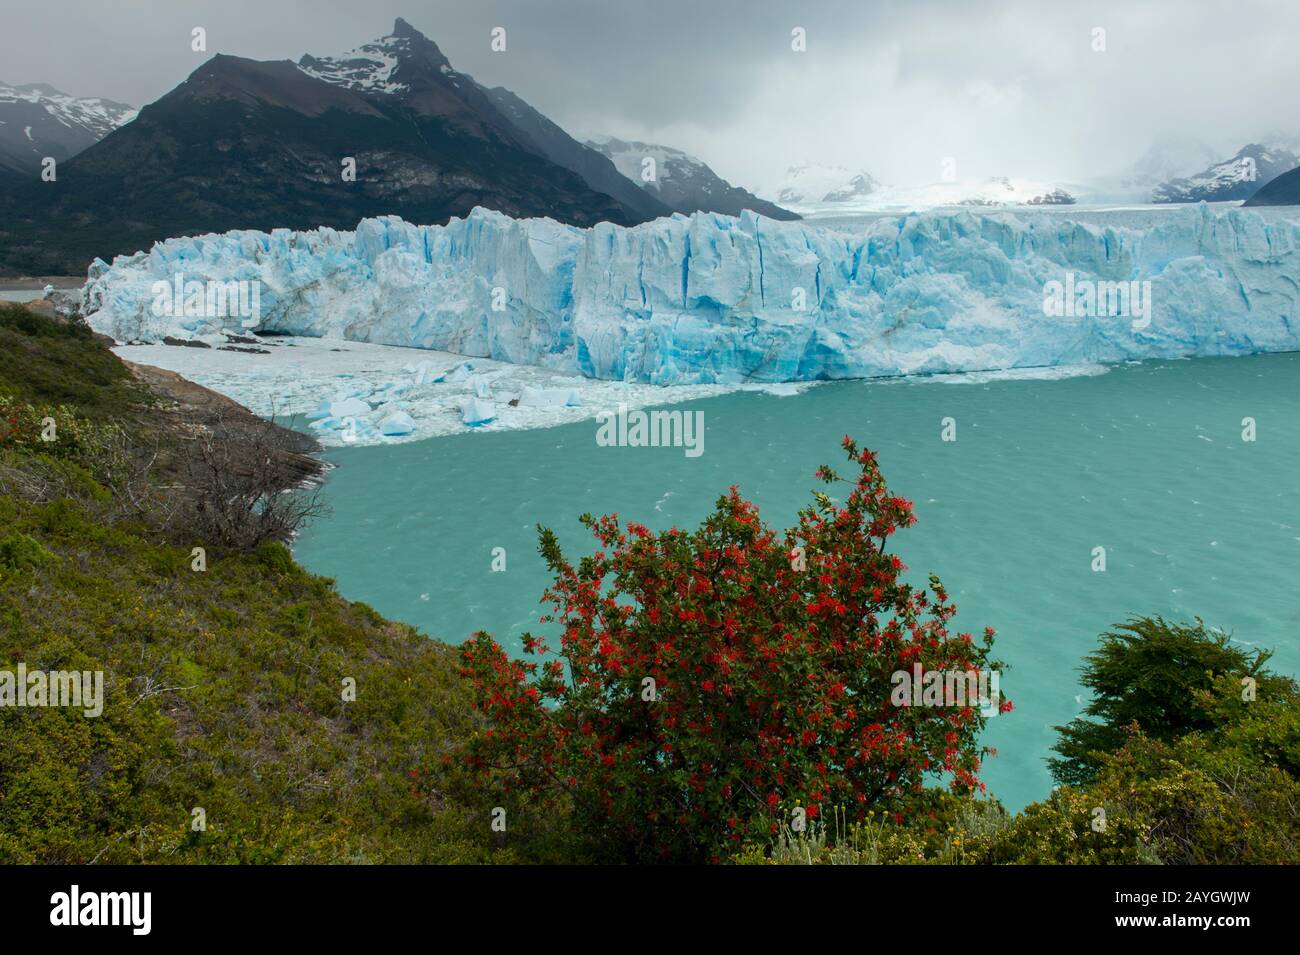 View of the Perito Moreno Glacier in Los Glaciares National Park near El Calafate, Argentina with Embothrium coccineum, commonly known as the Chilean Stock Photo